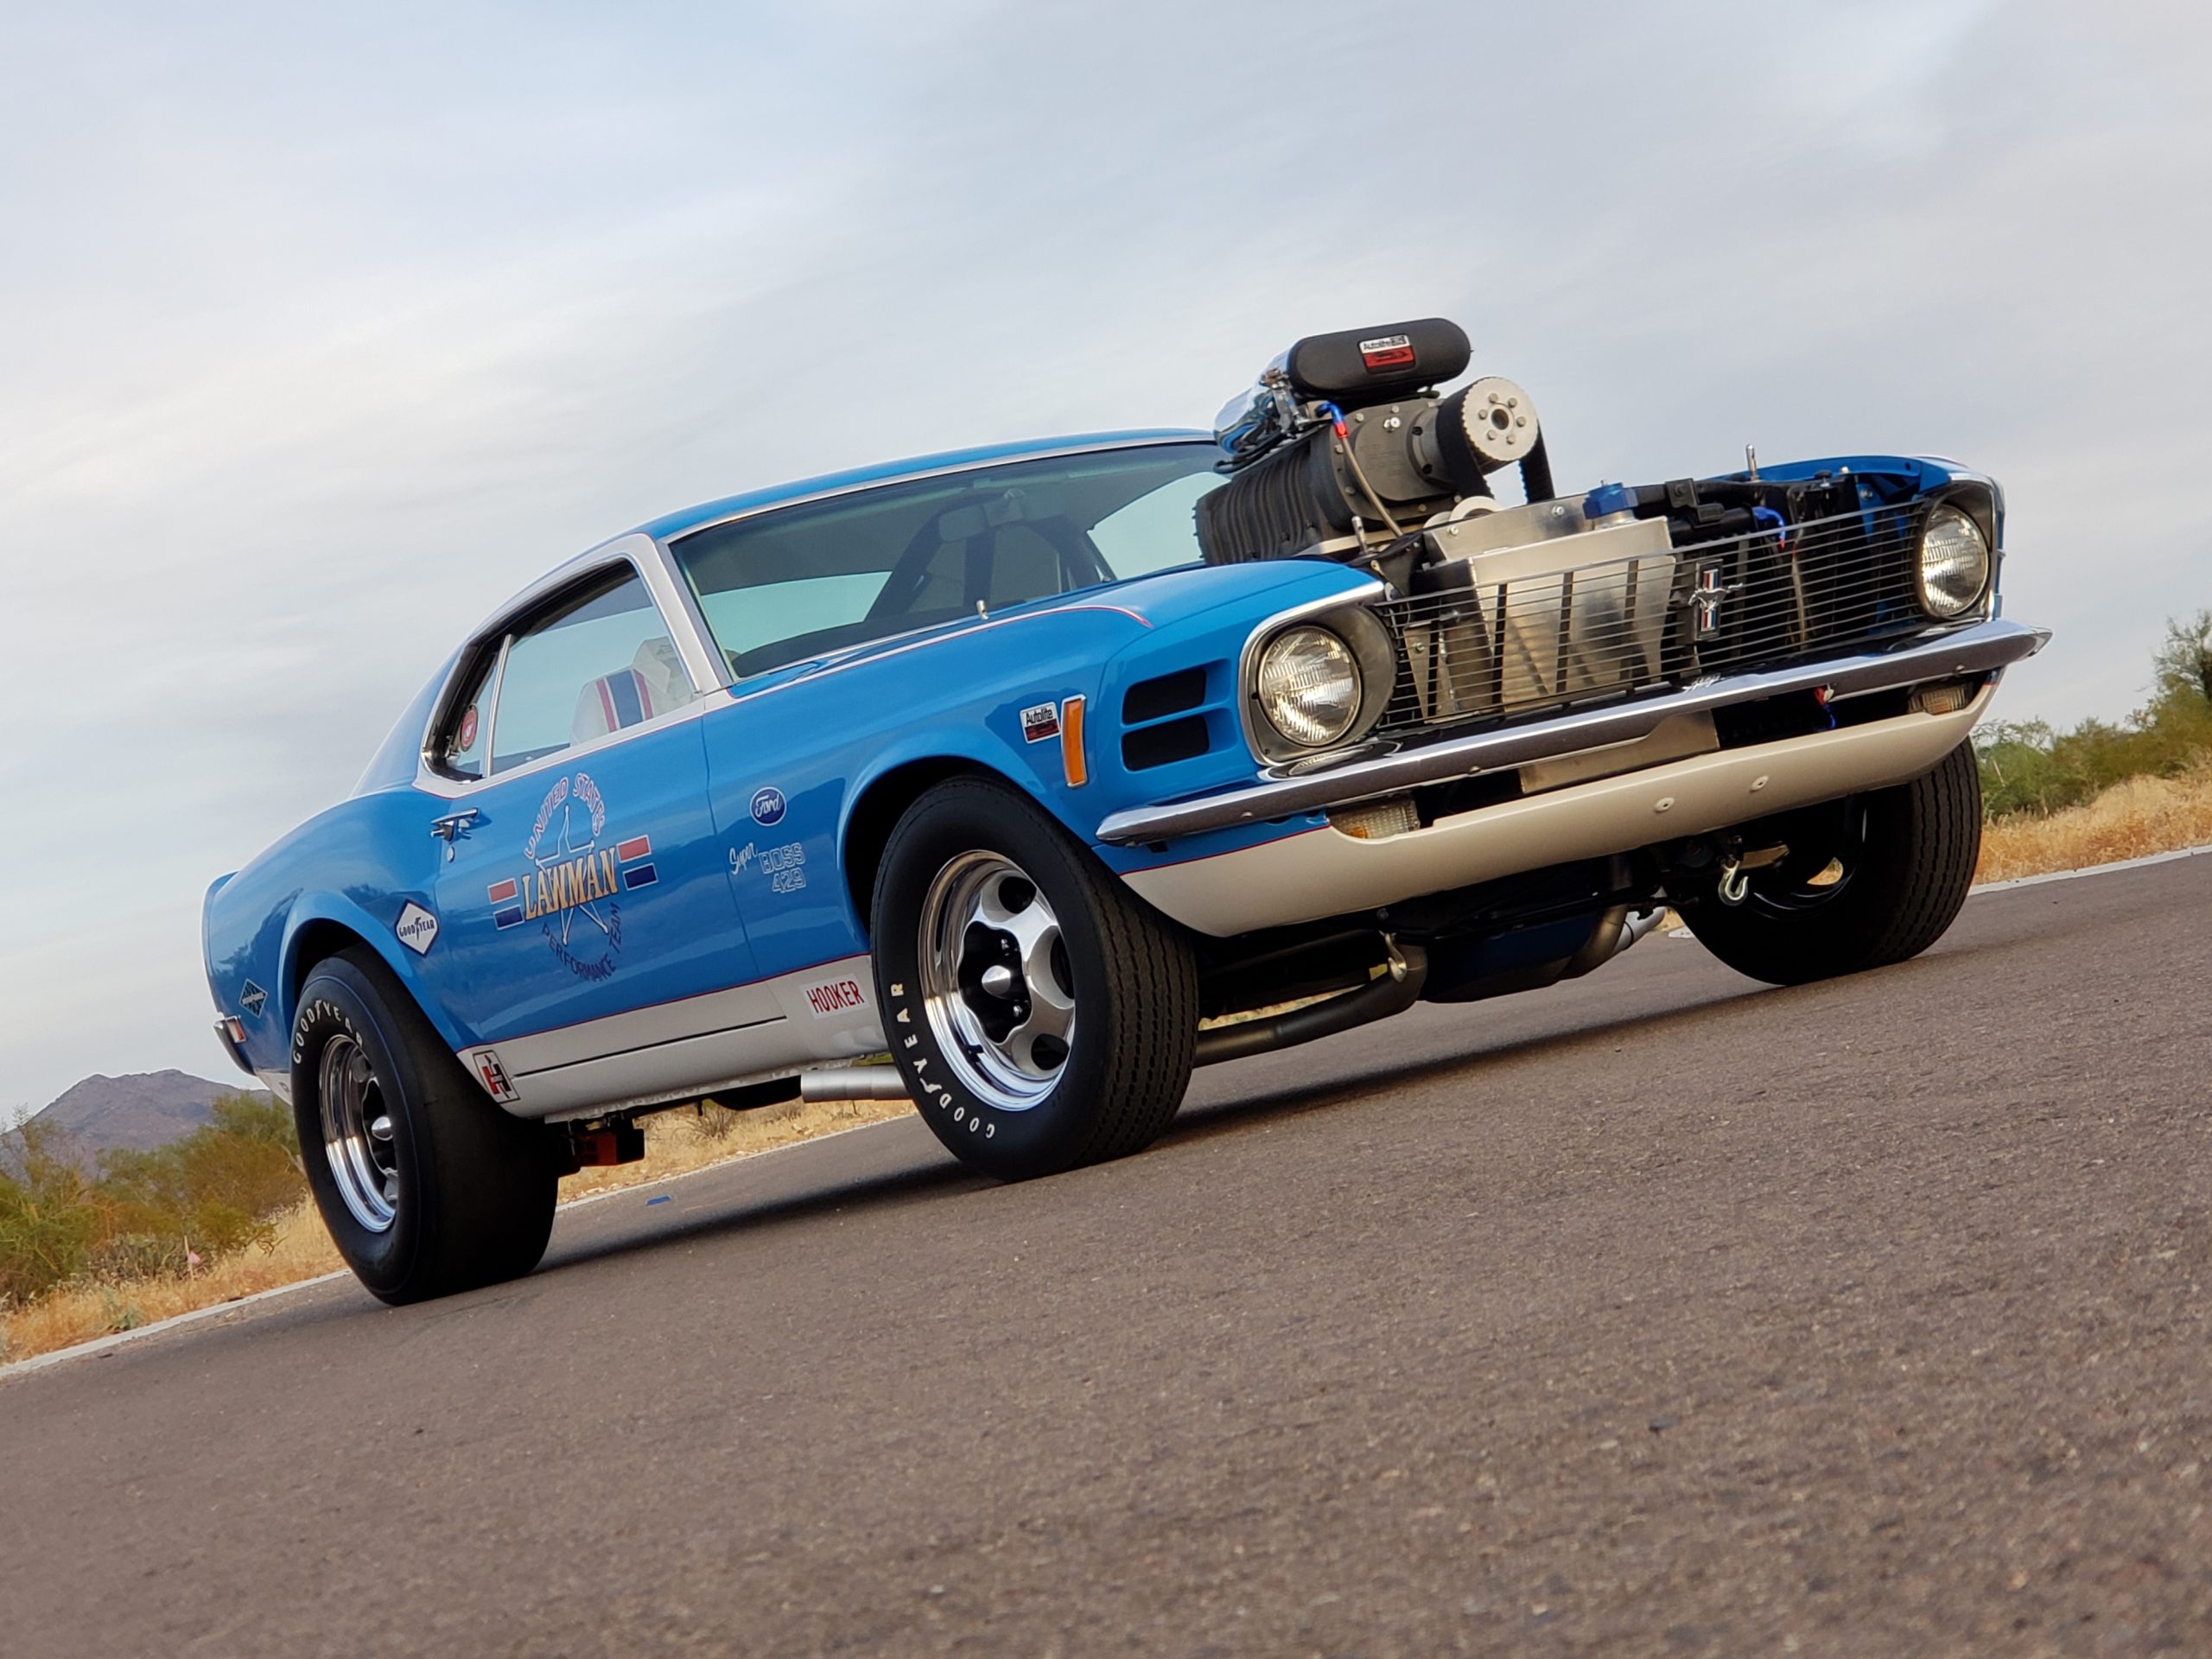 Lawman Mustang: The Boss 429 sent to war in the Pacific - Hagerty